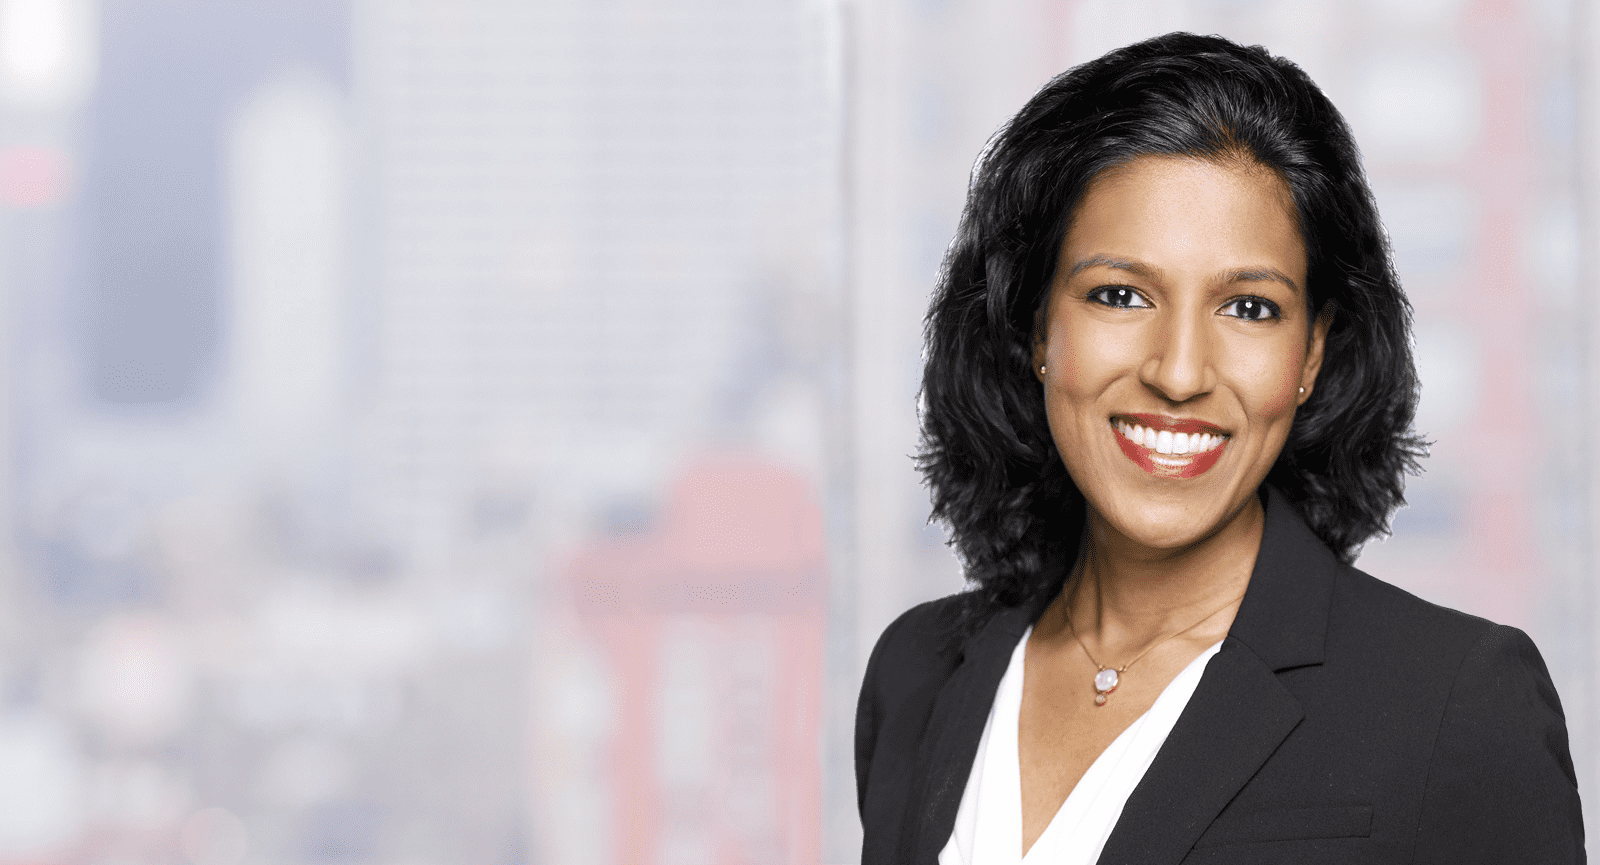 Cindy Singh. Experienced civil litigator who focuses her practice on business disputes and civil rights cases.